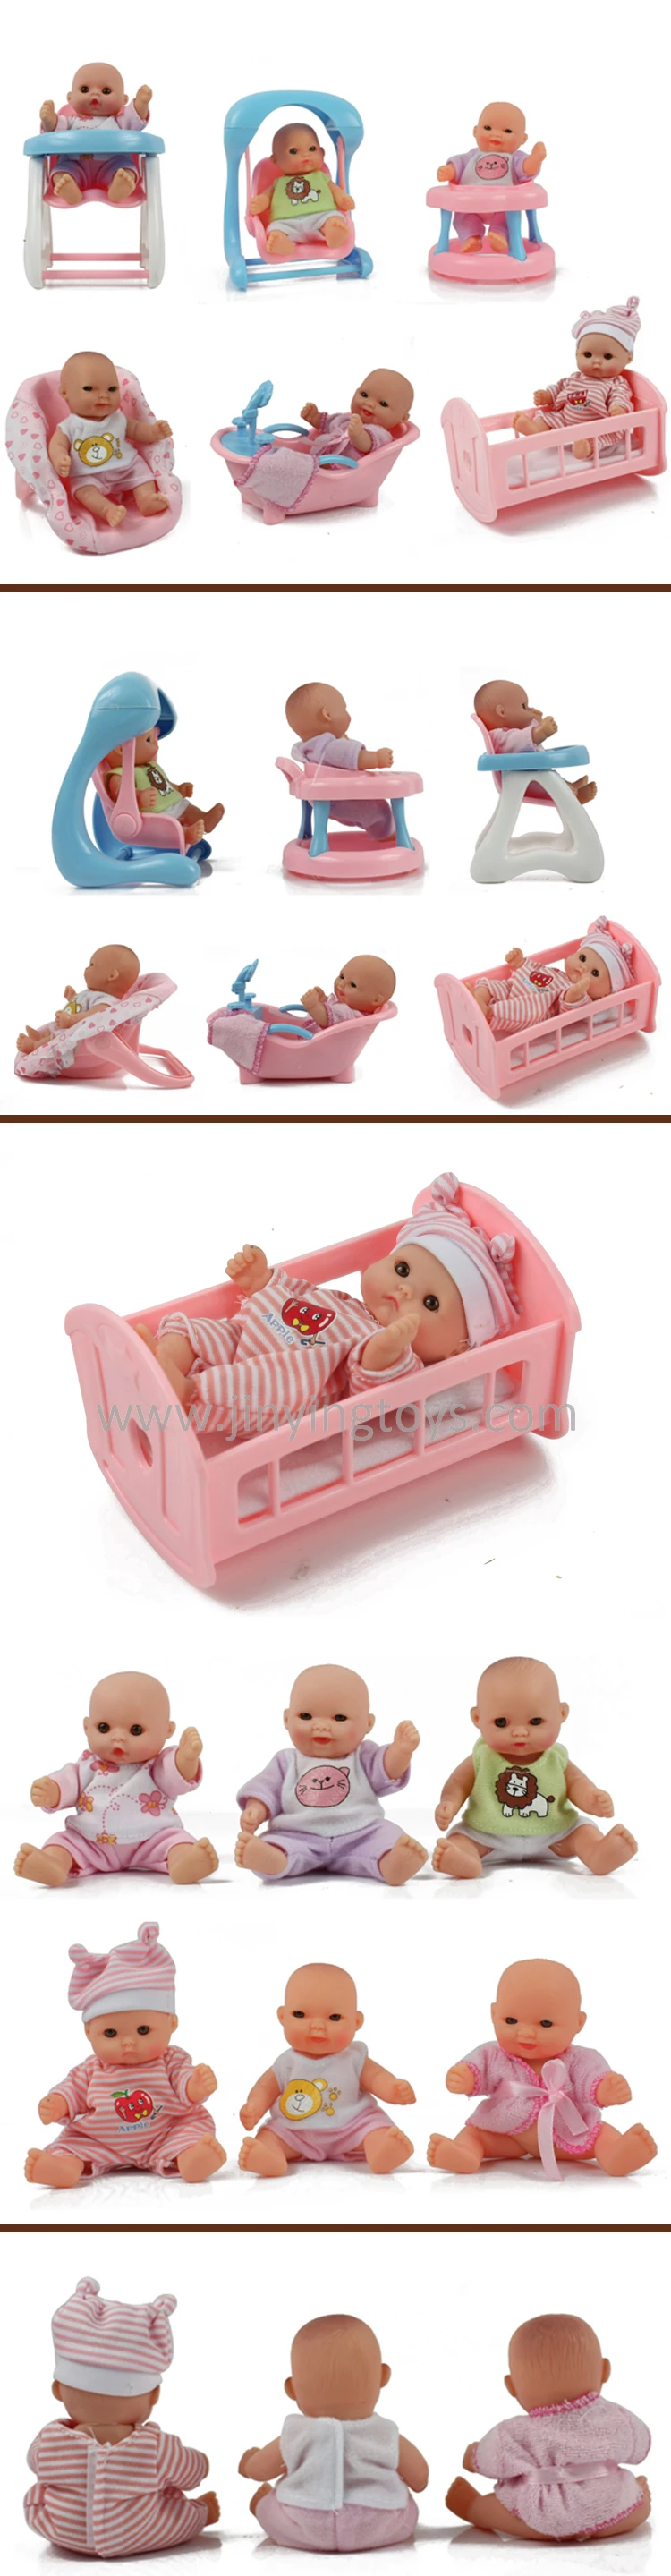 New 5 Inch Mini Cheap Silicone Baby Dolls For Sale 6 Pcs ...